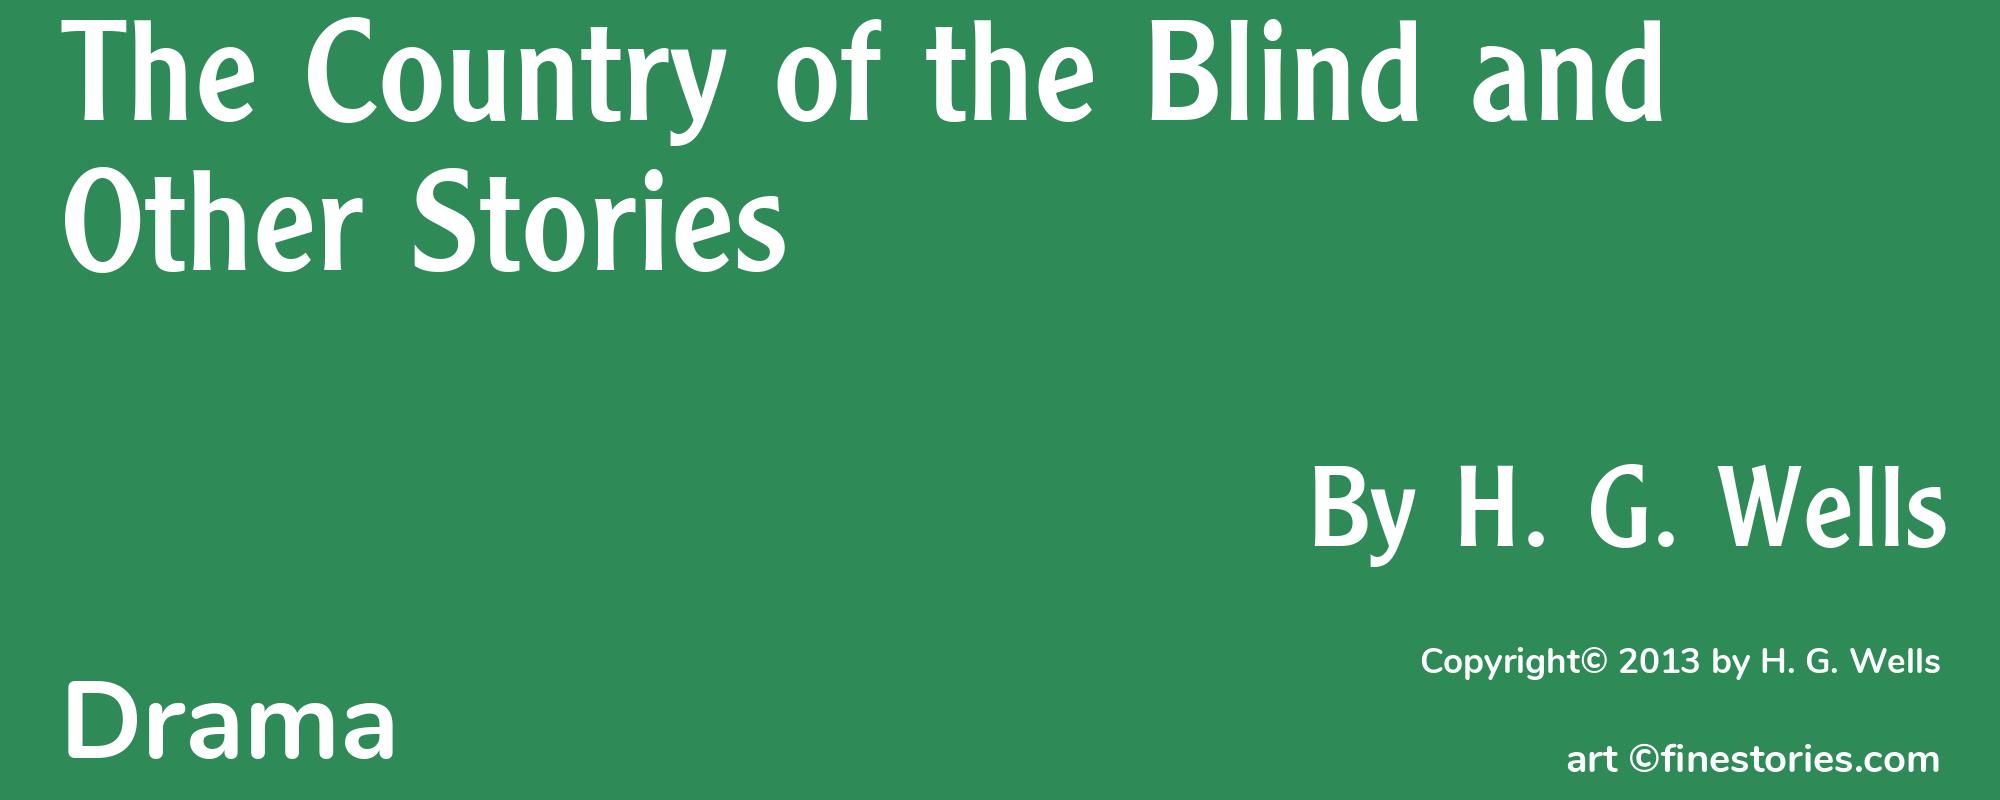 The Country of the Blind and Other Stories - Cover